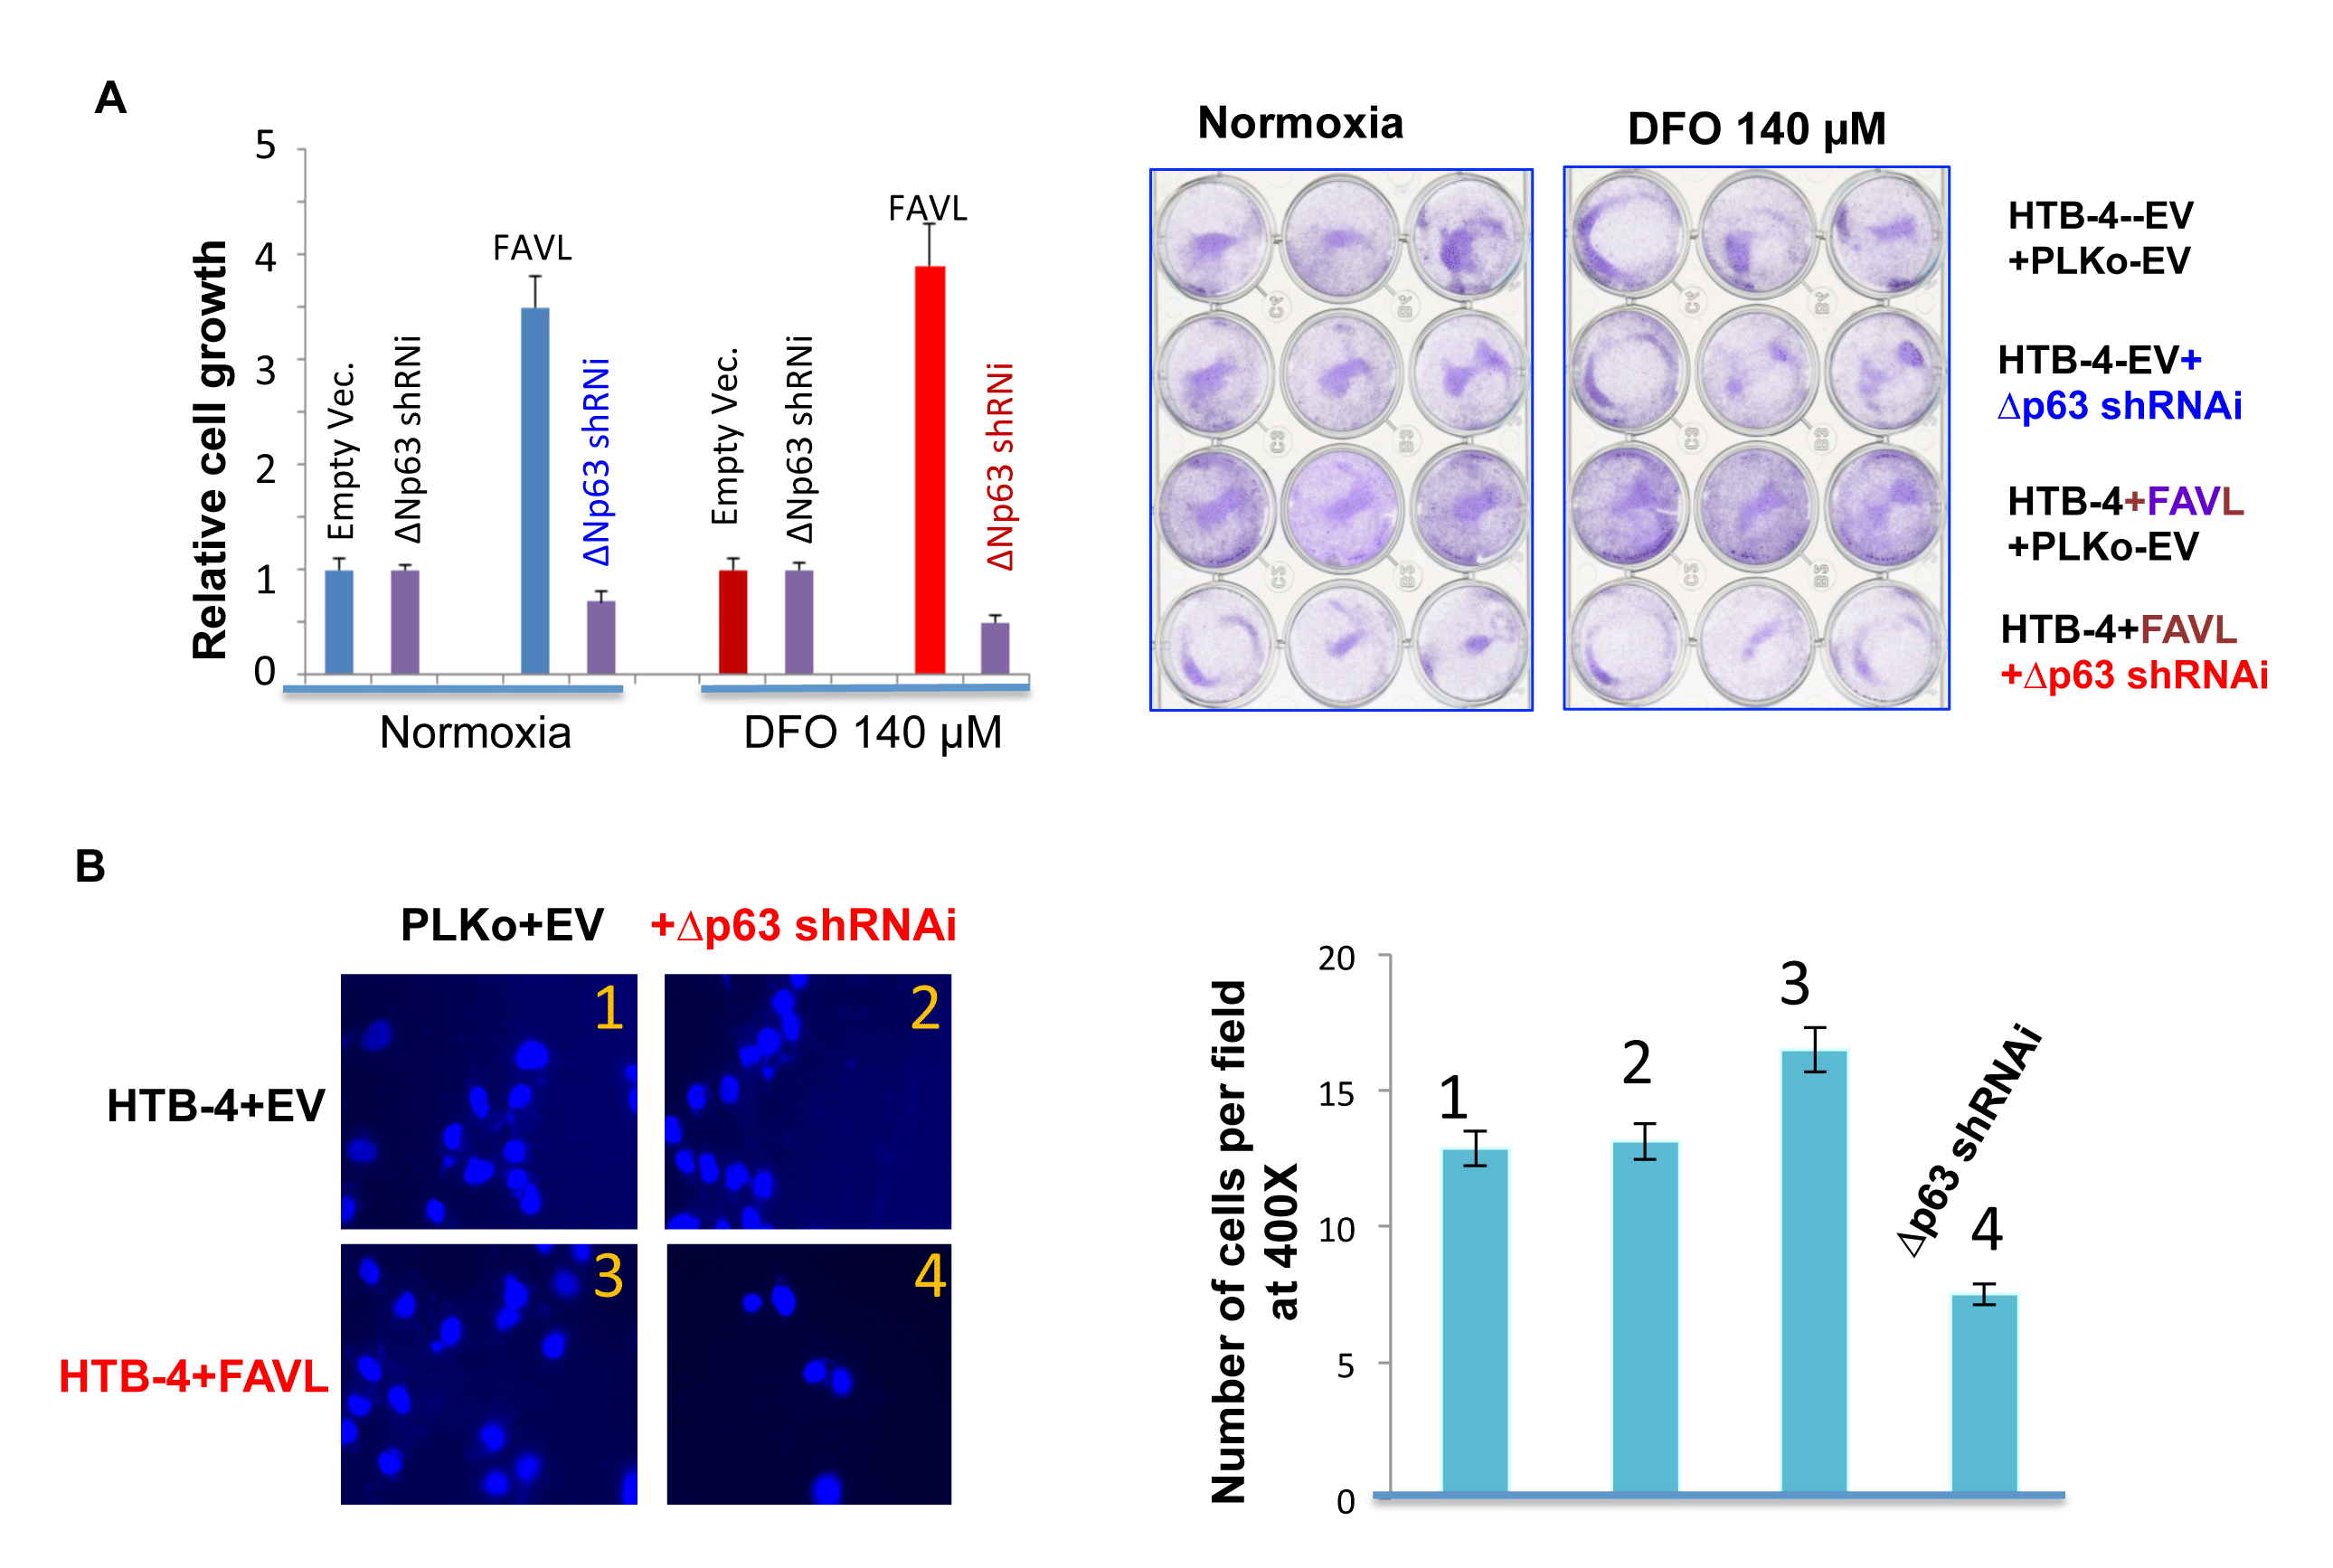 Silencing &#x2206;Np63 mRNA expression substantially abrogates the tumorigenic potential of HTB-4 bladder cancer cells triggered by FA pathway impaired by elevated FAVL.